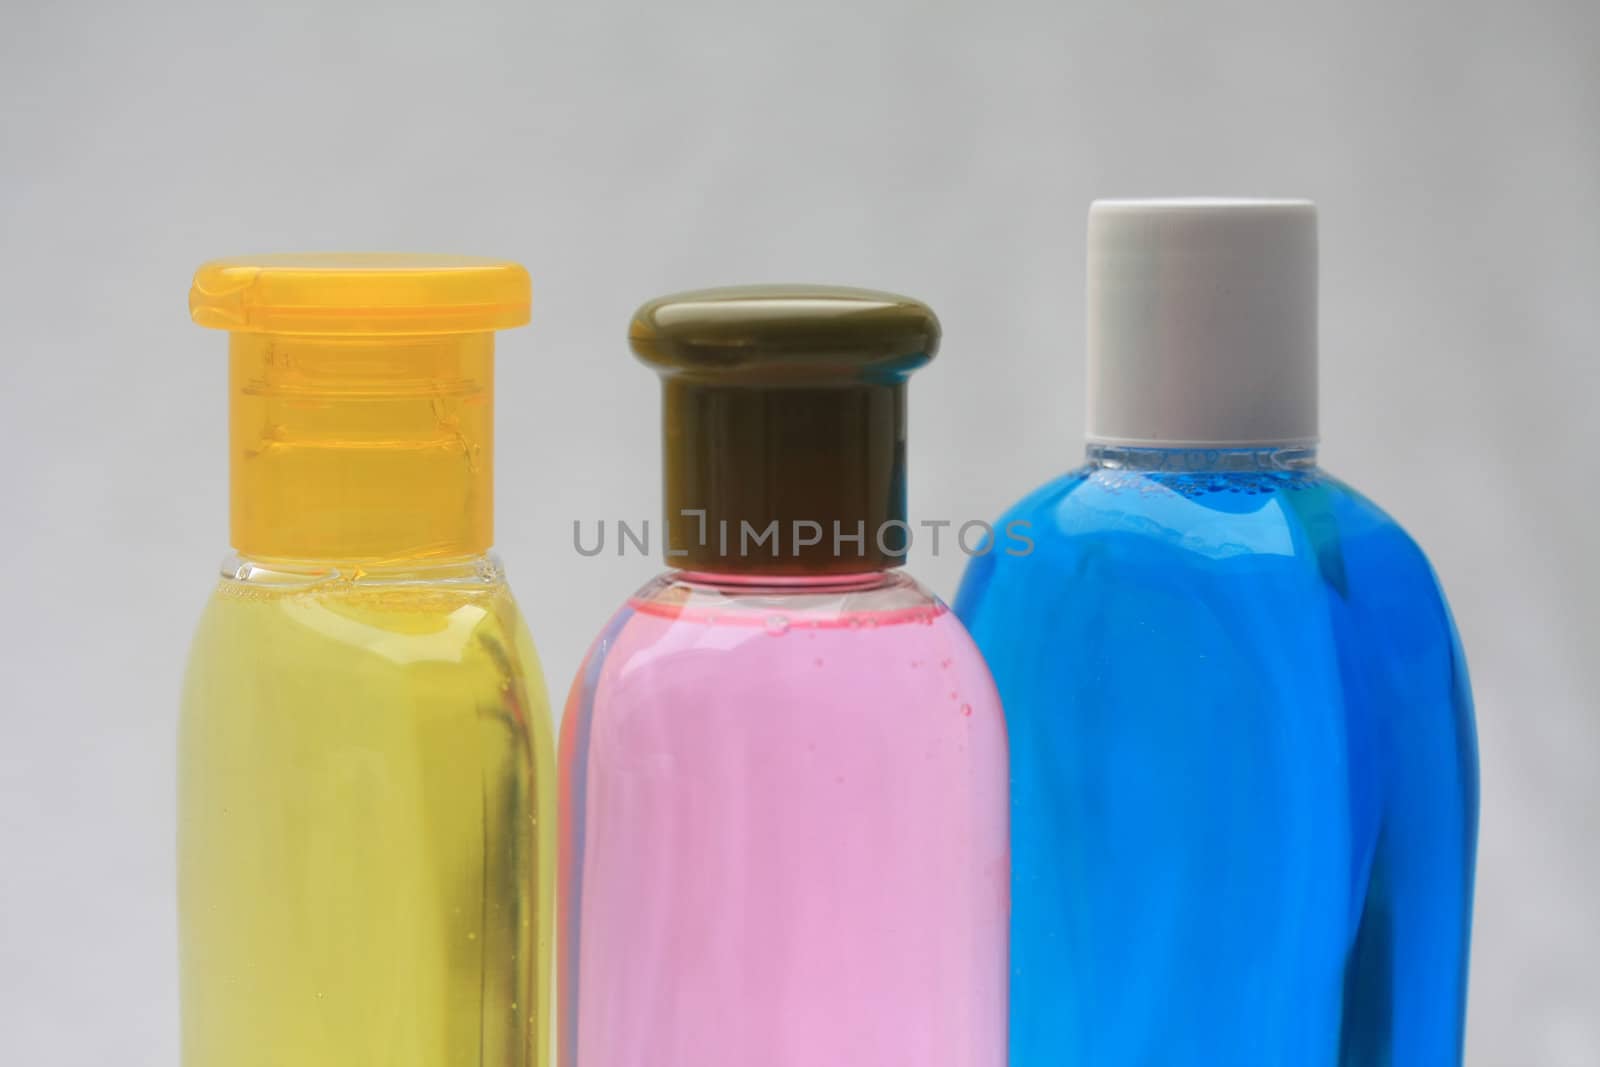 Close up of three shampoo bottles in yellow, pink and blue